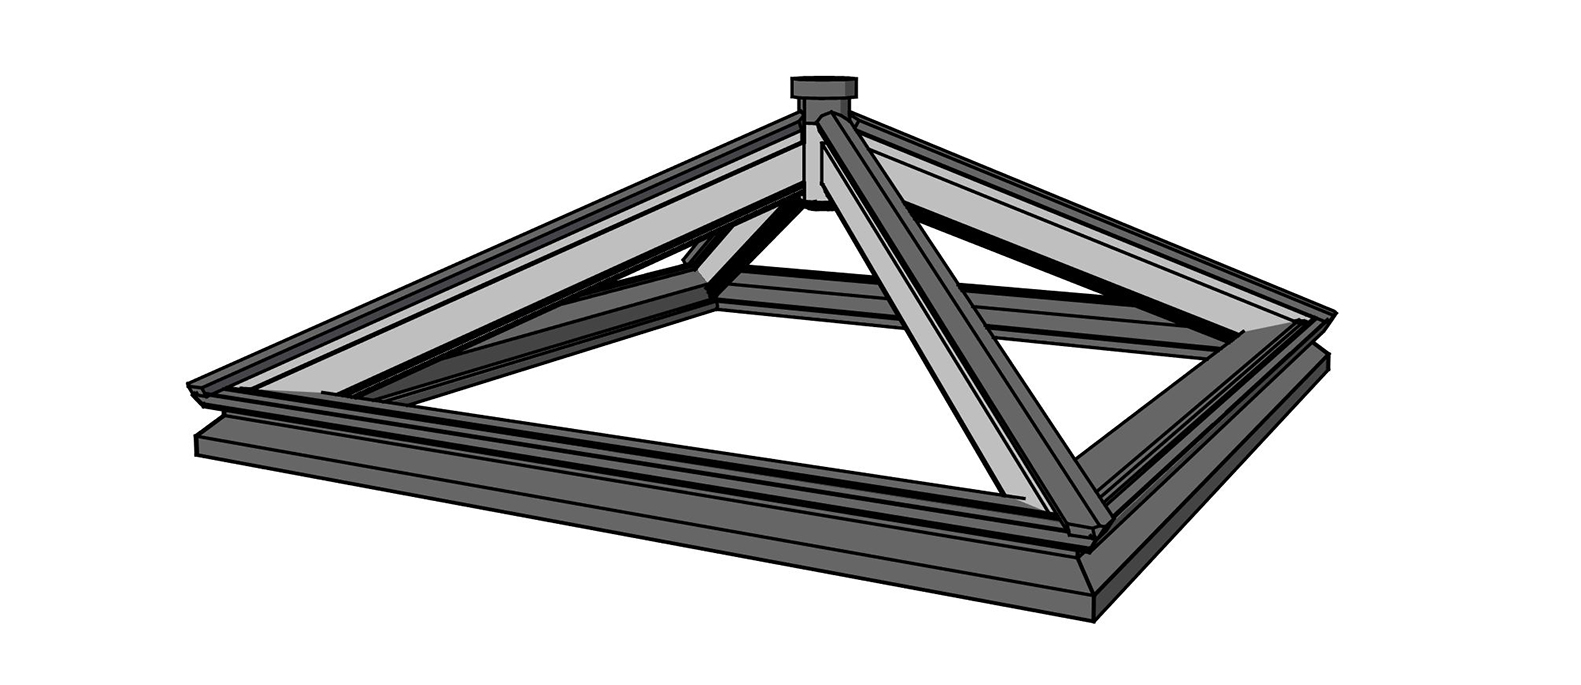 Just Roof Lanterns Linear Collection of Roof Lanterns